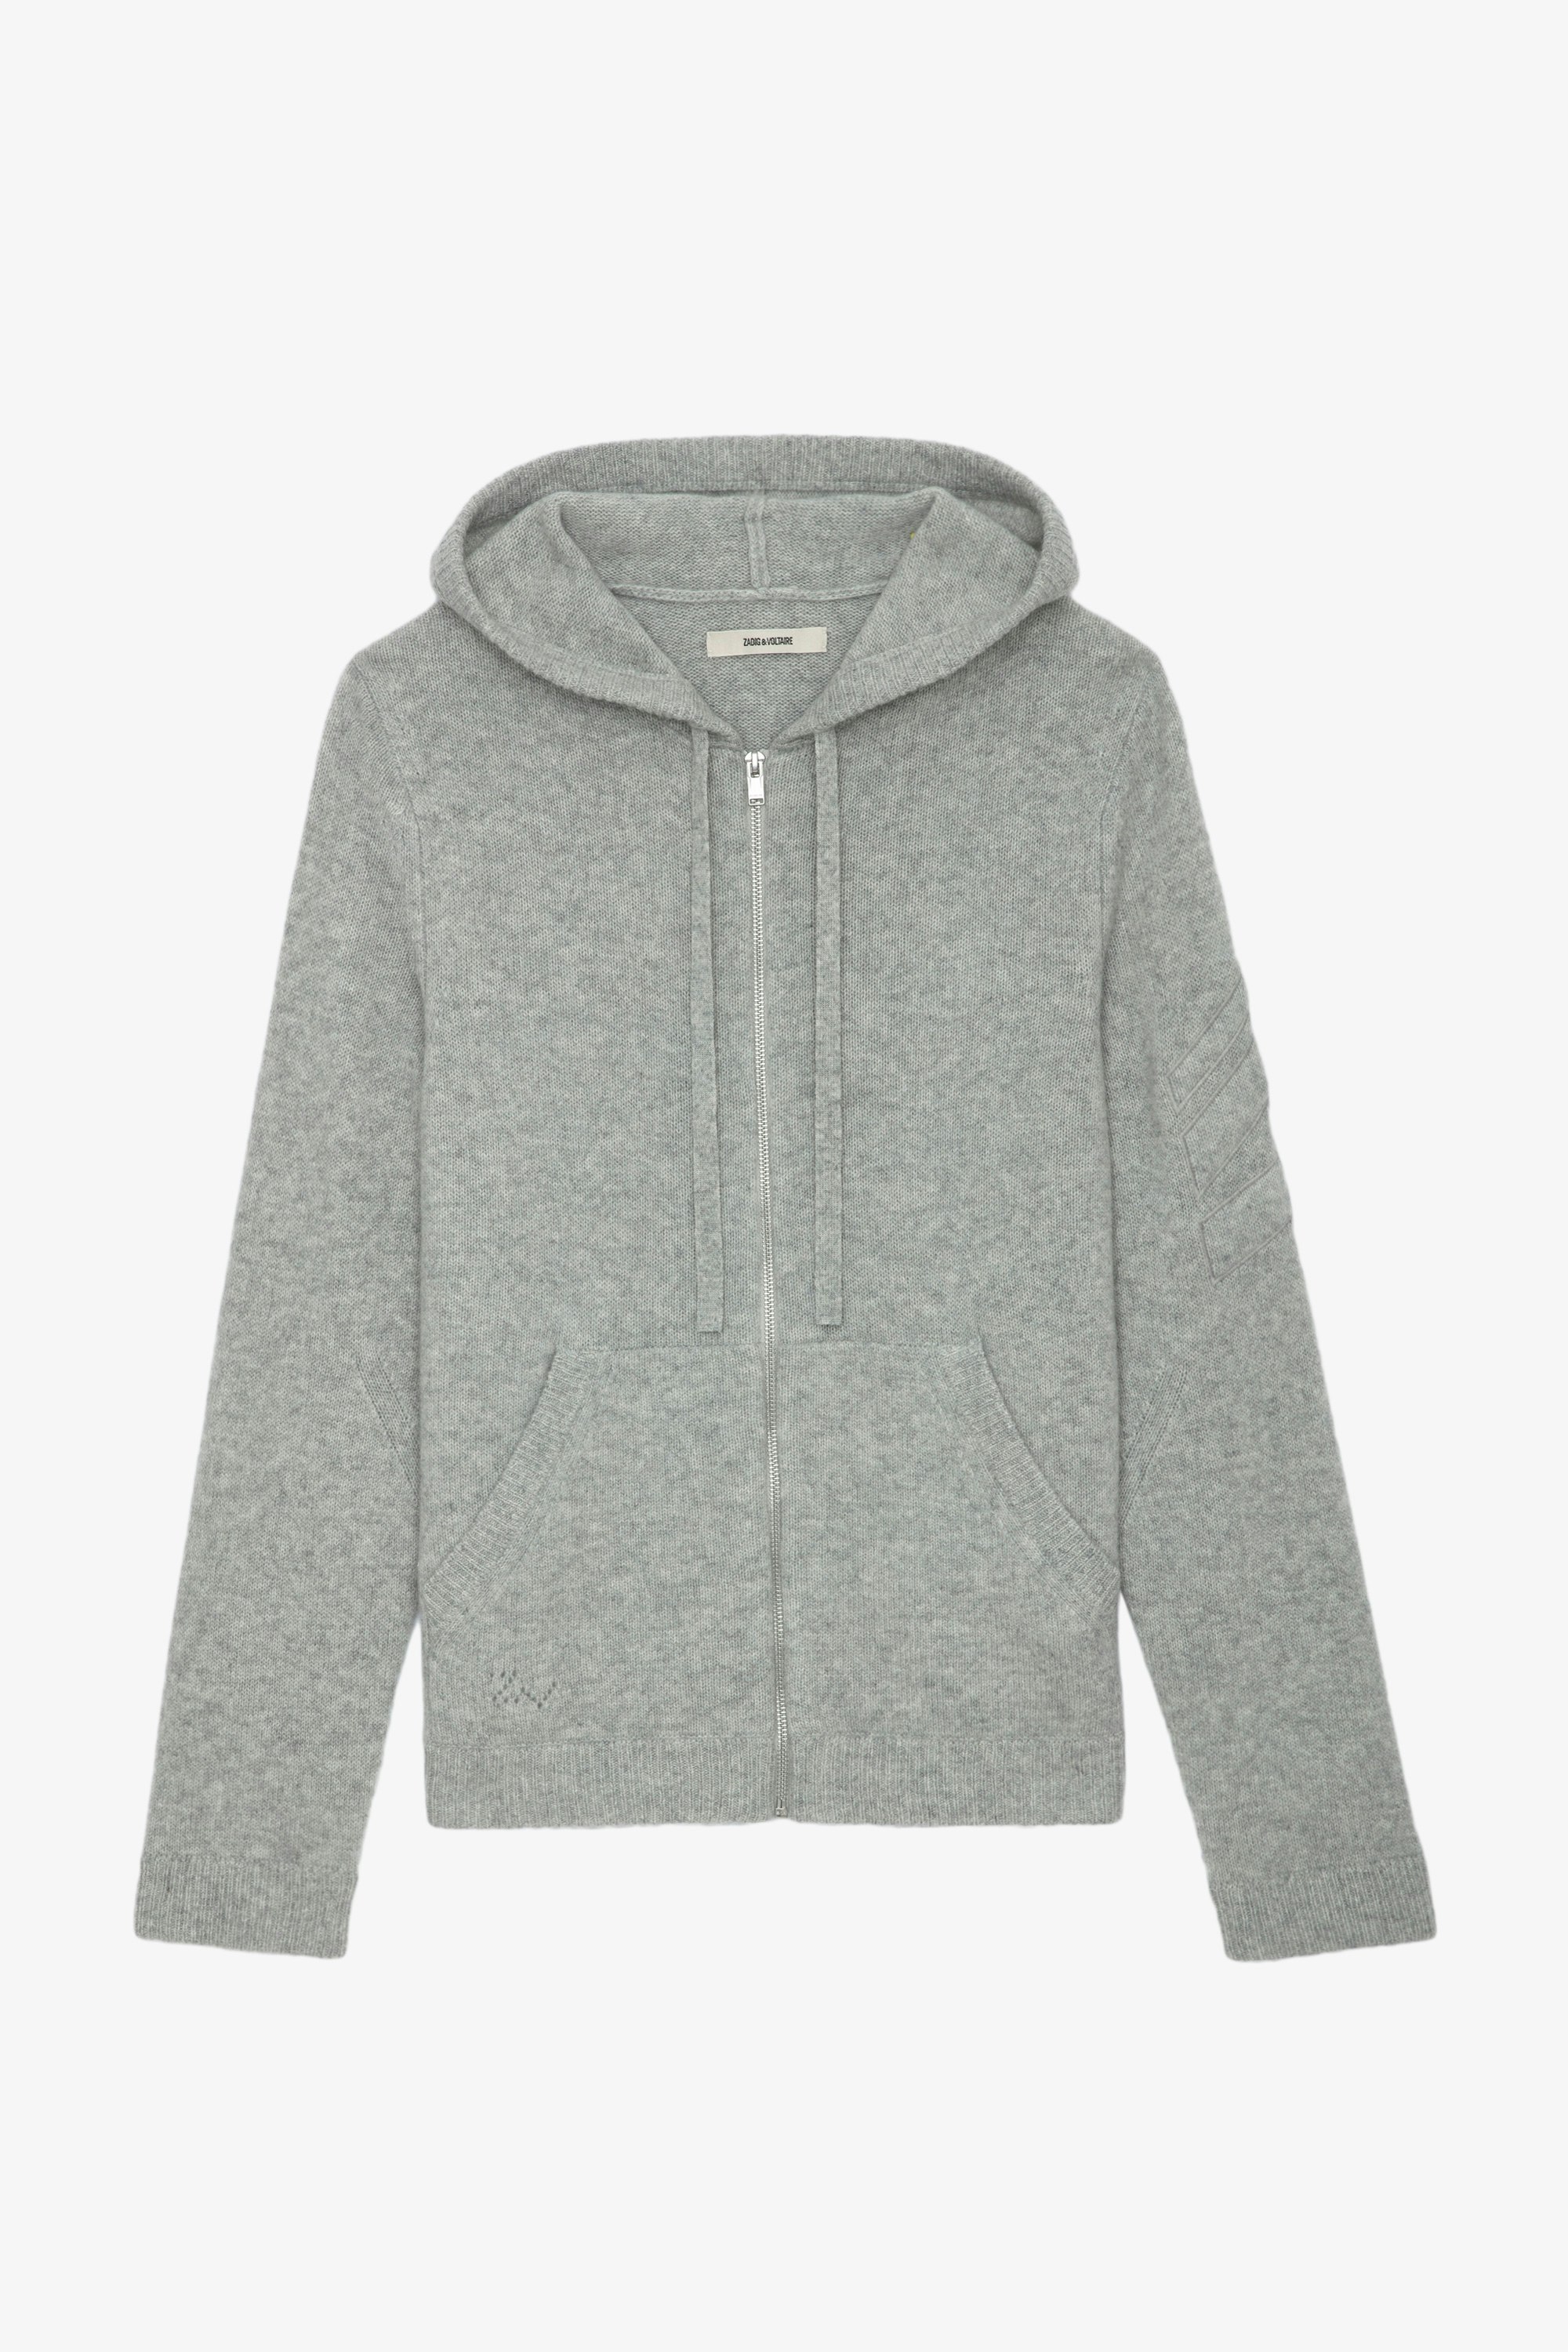 Clash Cashmere Cardigan - Grey cashmere hooded zip-up cardigan with arrows on the left sleeve.